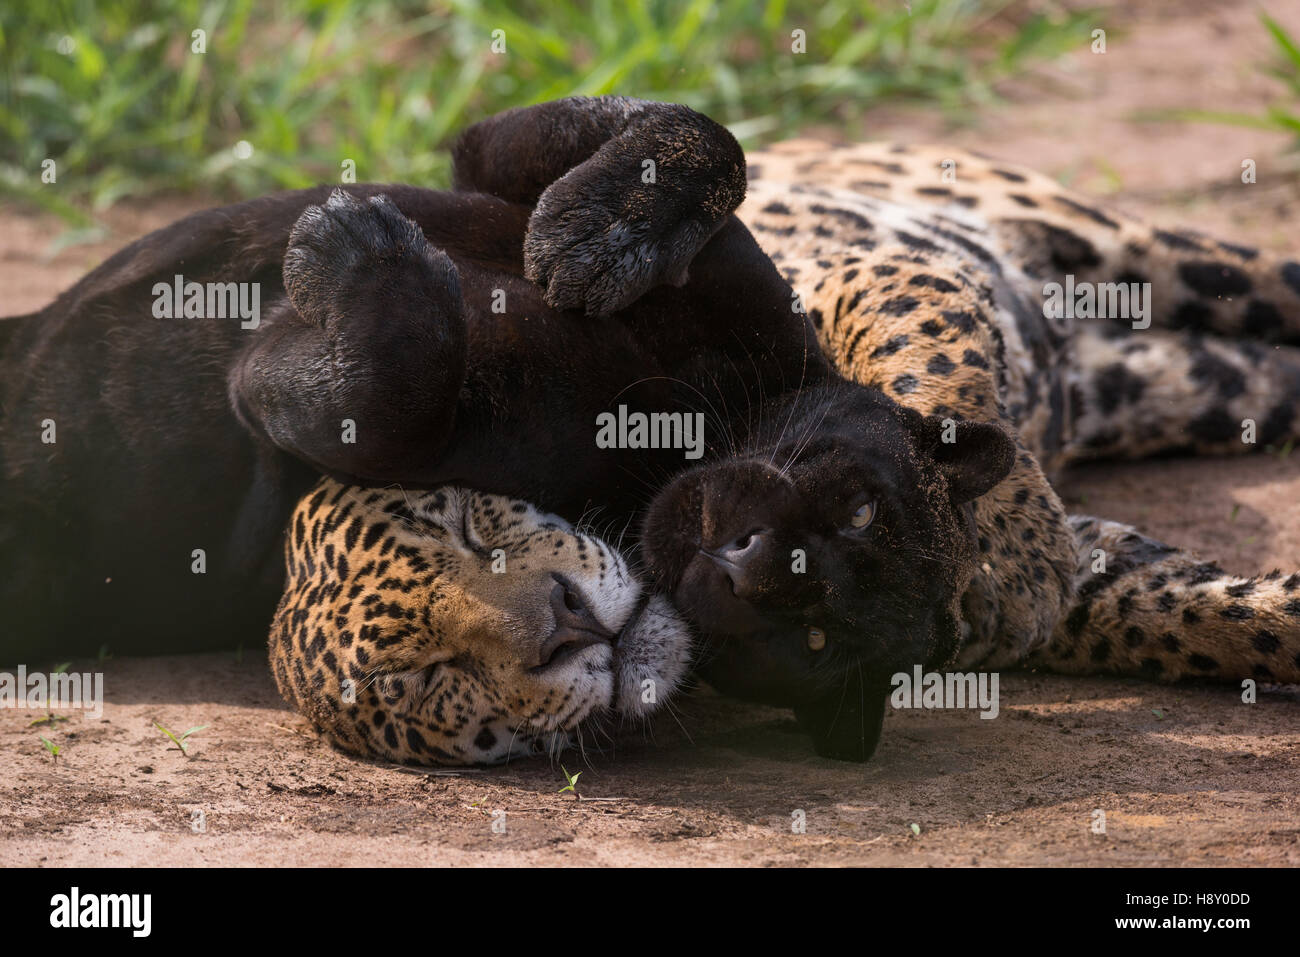 A dark (melanic) jaguar and a normal patterned one. This is a pair, male and female. Stock Photo